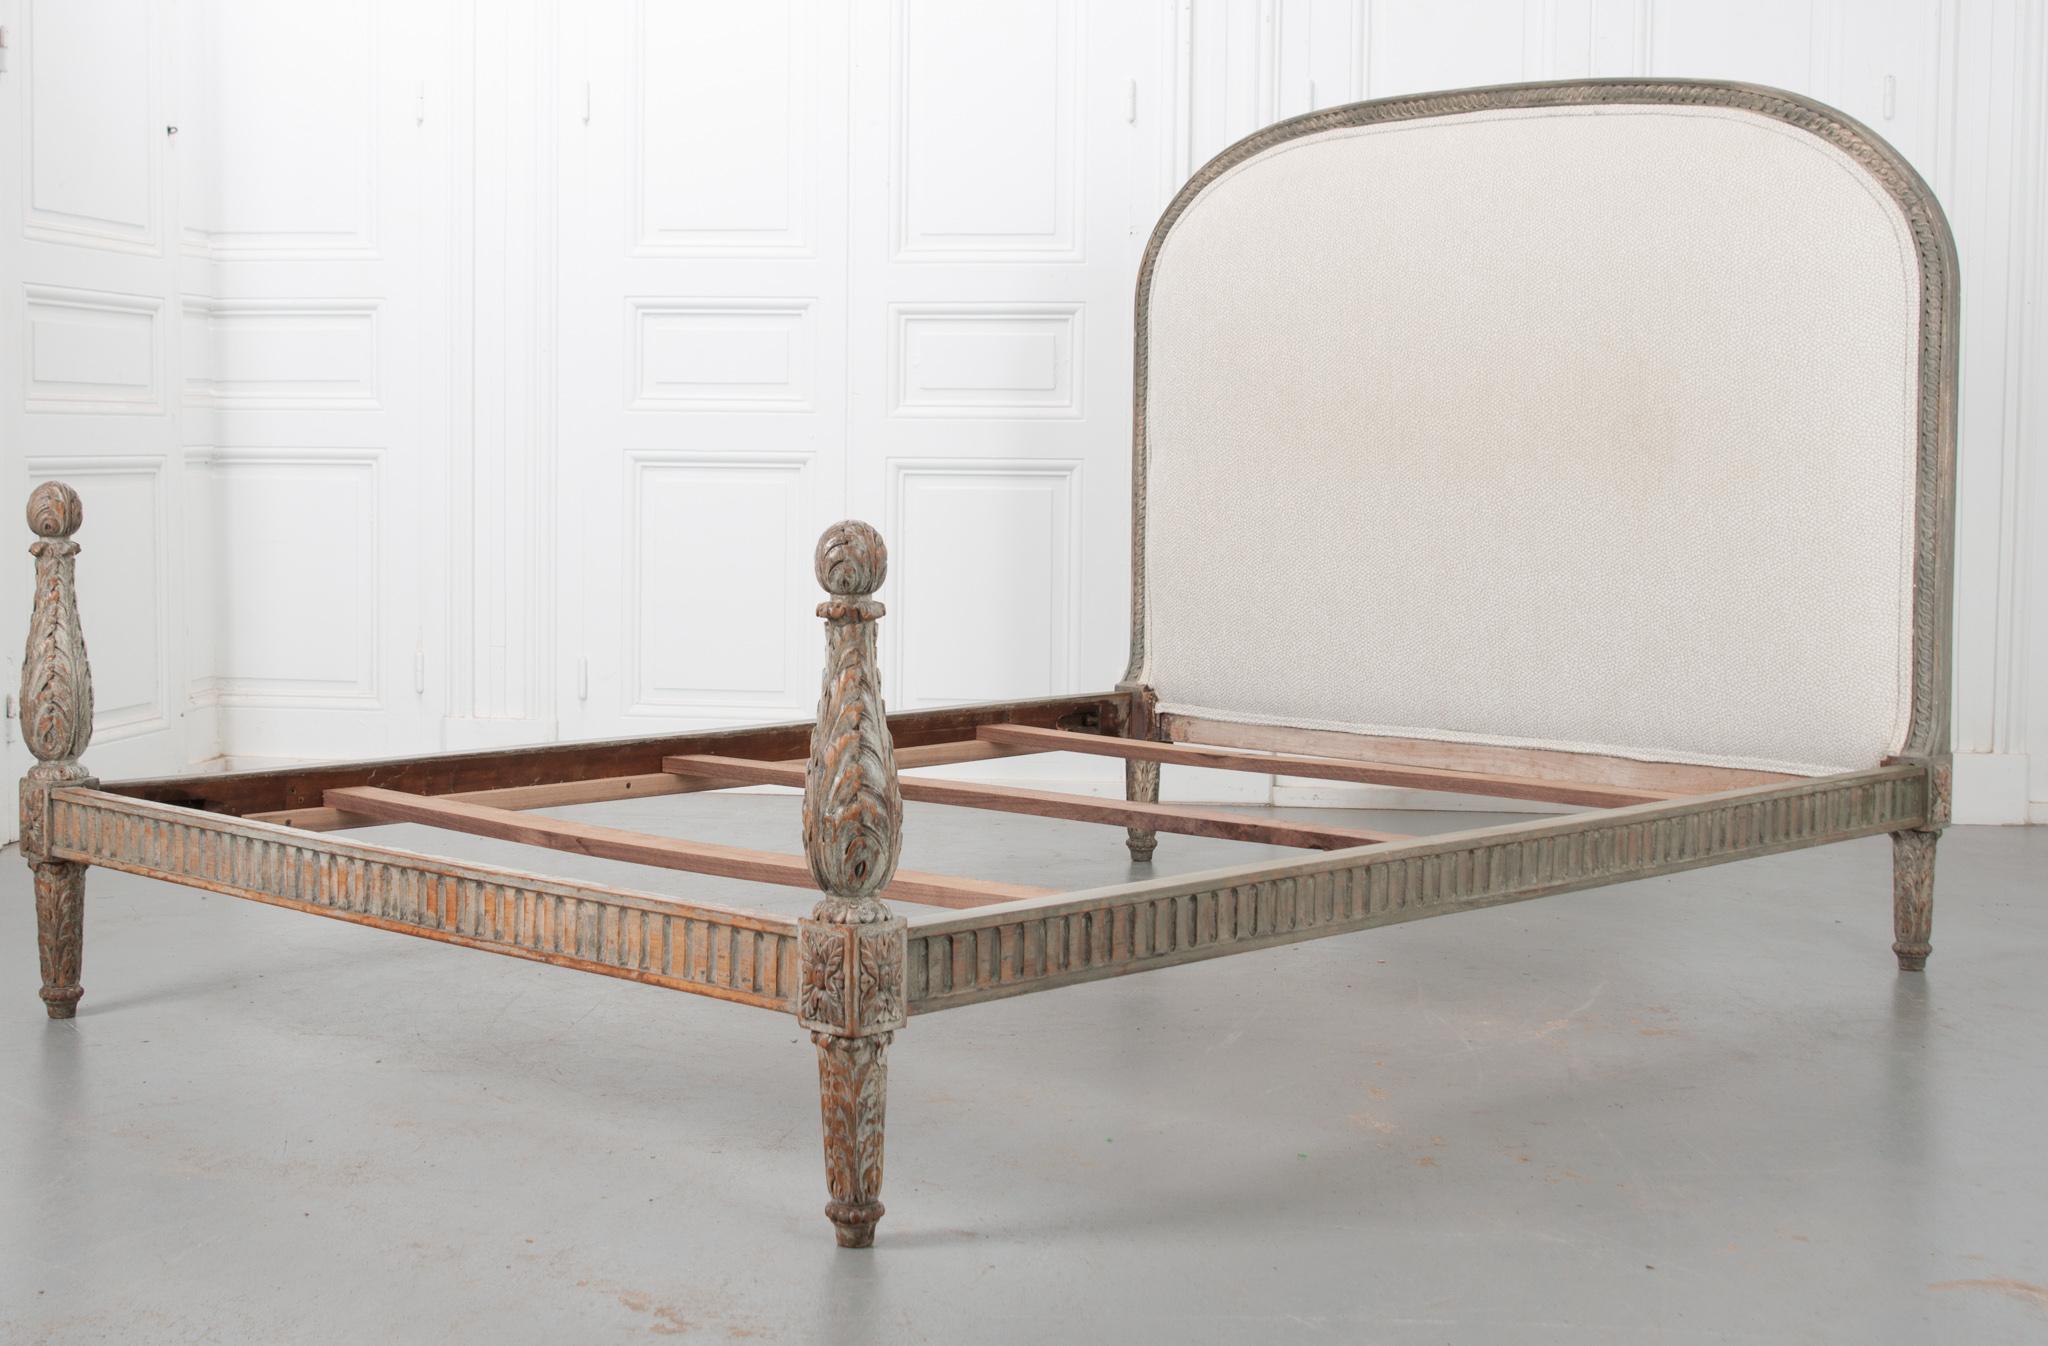 Beautifully carved details cover nearly 100% of this exceptional 19th century French Louis XVI-style bed’s frame. The wooden frame is comprised of an arched, upholstered headboard, its carved side rails, and two turned baluster posts that act as a